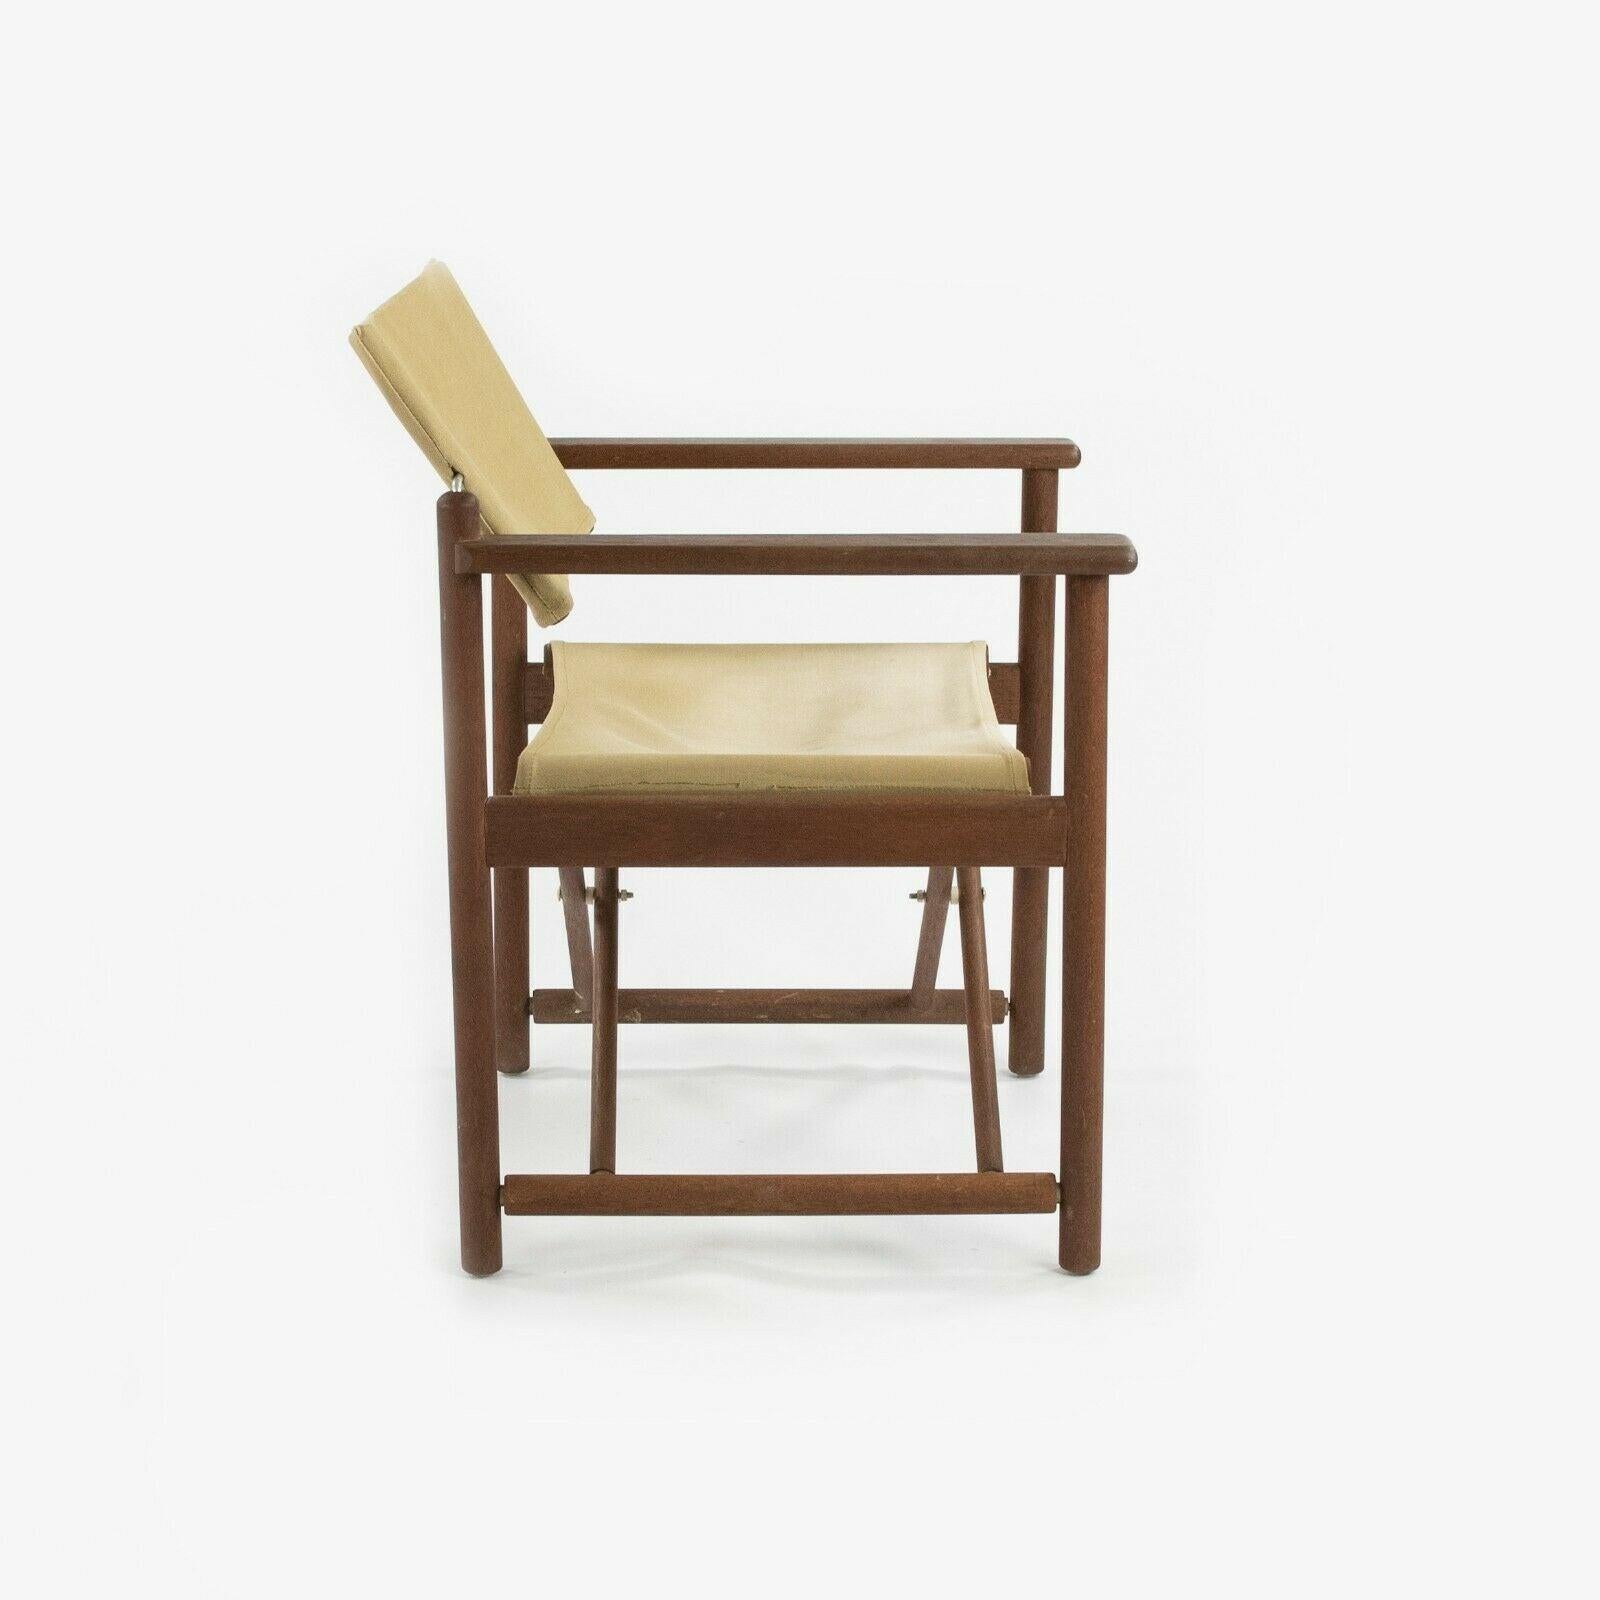 Listed for sale is a circa 1960s walnut and canvas campaign chair, which is reminiscent of Borge Mogensen and Mogens Koch designs from Denmark. The chair is in gorgeous original condition. The wooden components have held up nicely and canvas appears